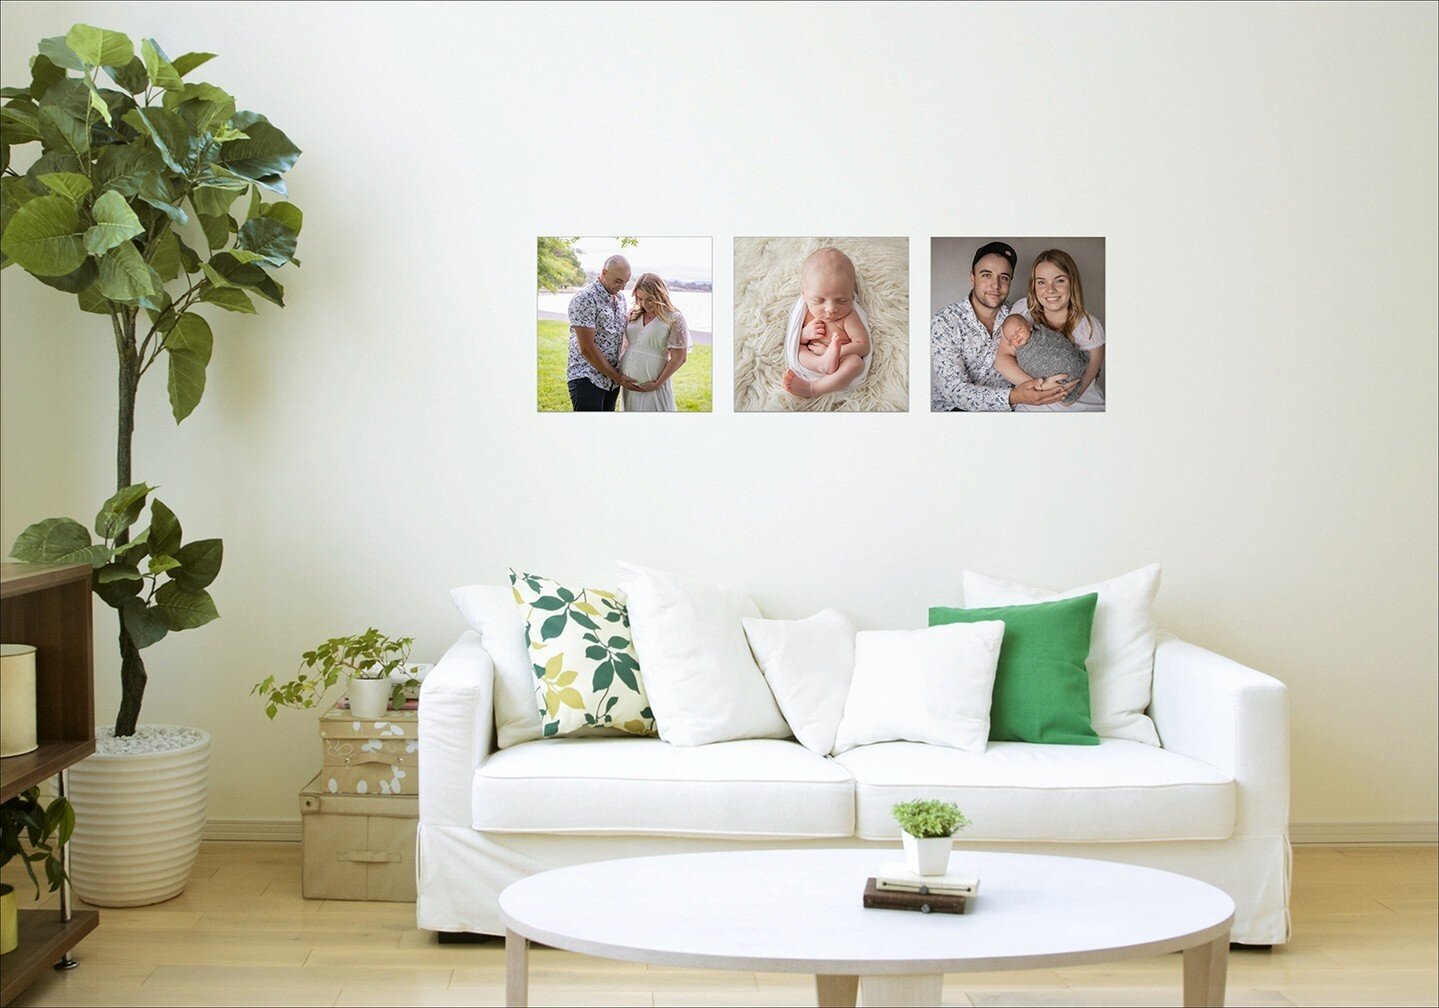 Zoom in on this one! 😍 You know you need this, right? What a gorgeous way to present your parenthood journey. Maternity, newborn and family imagery in one stunning wall art collection.⁠
⁠
Let's make it happen for you soon!⁠
⁠
Hayley Carberry Photogr